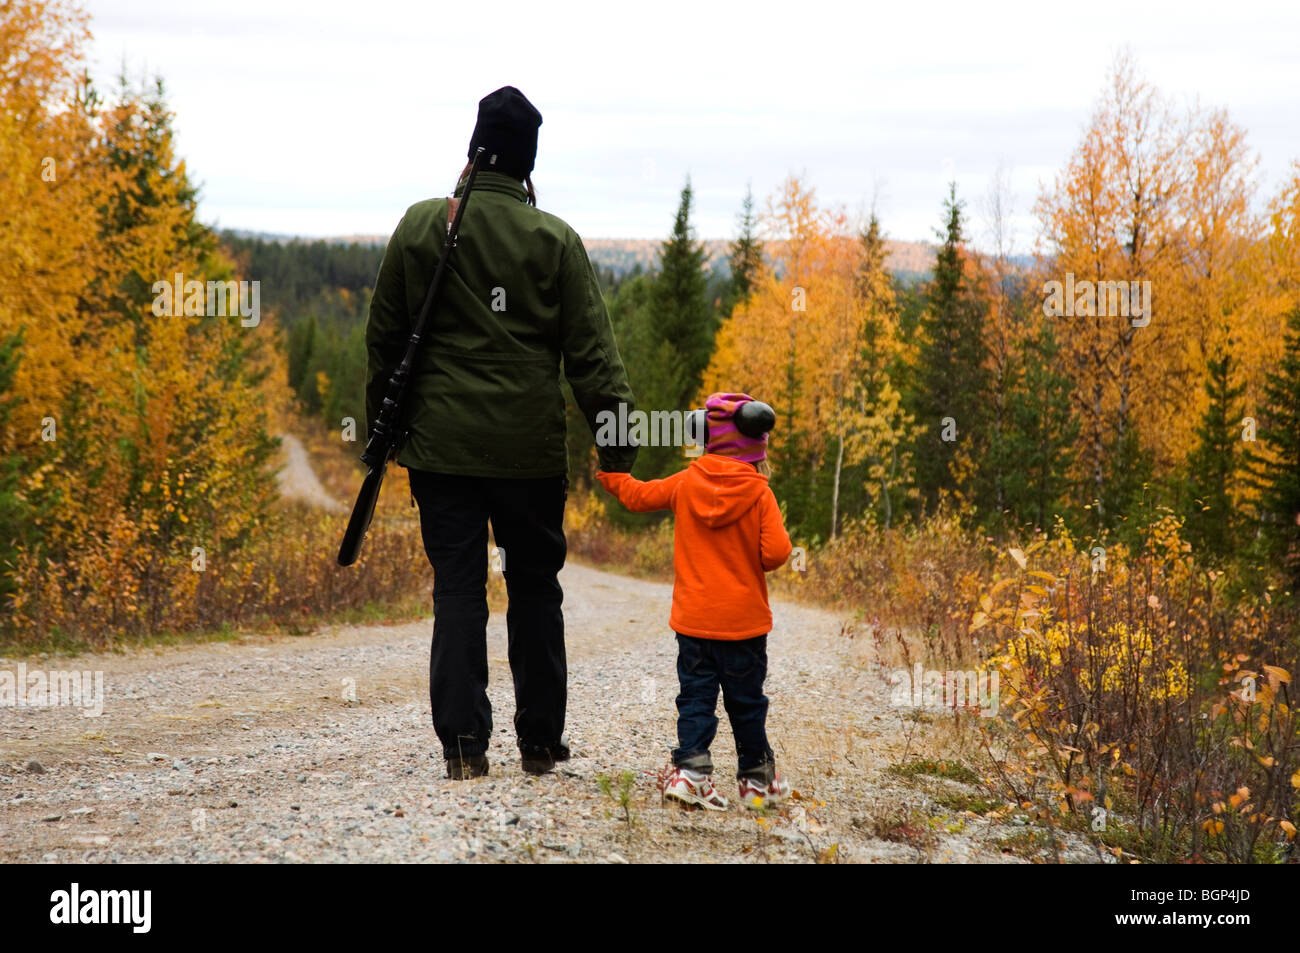 A woman and a child hunting, Sweden. Stock Photo